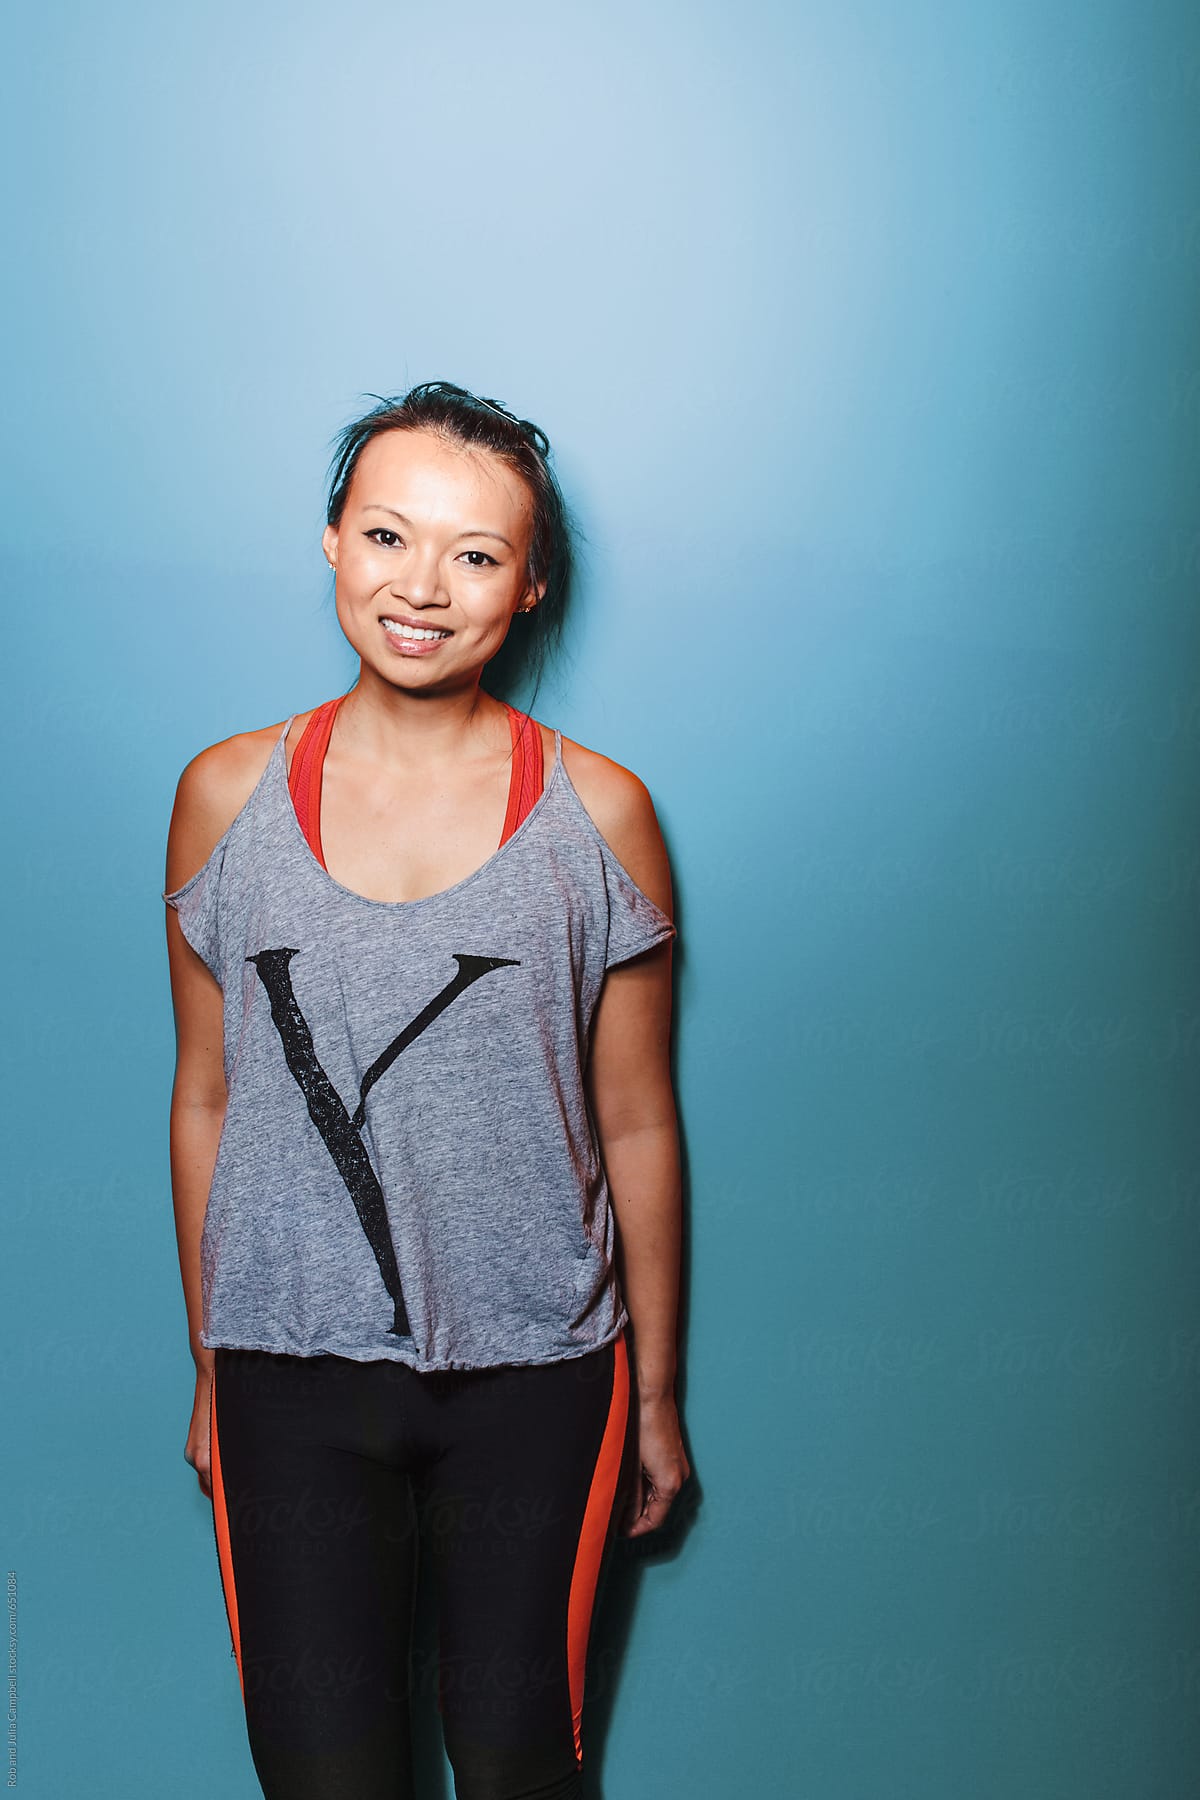 Happy asian woman smiling near blue wall - sweaty and smiling after hard workout